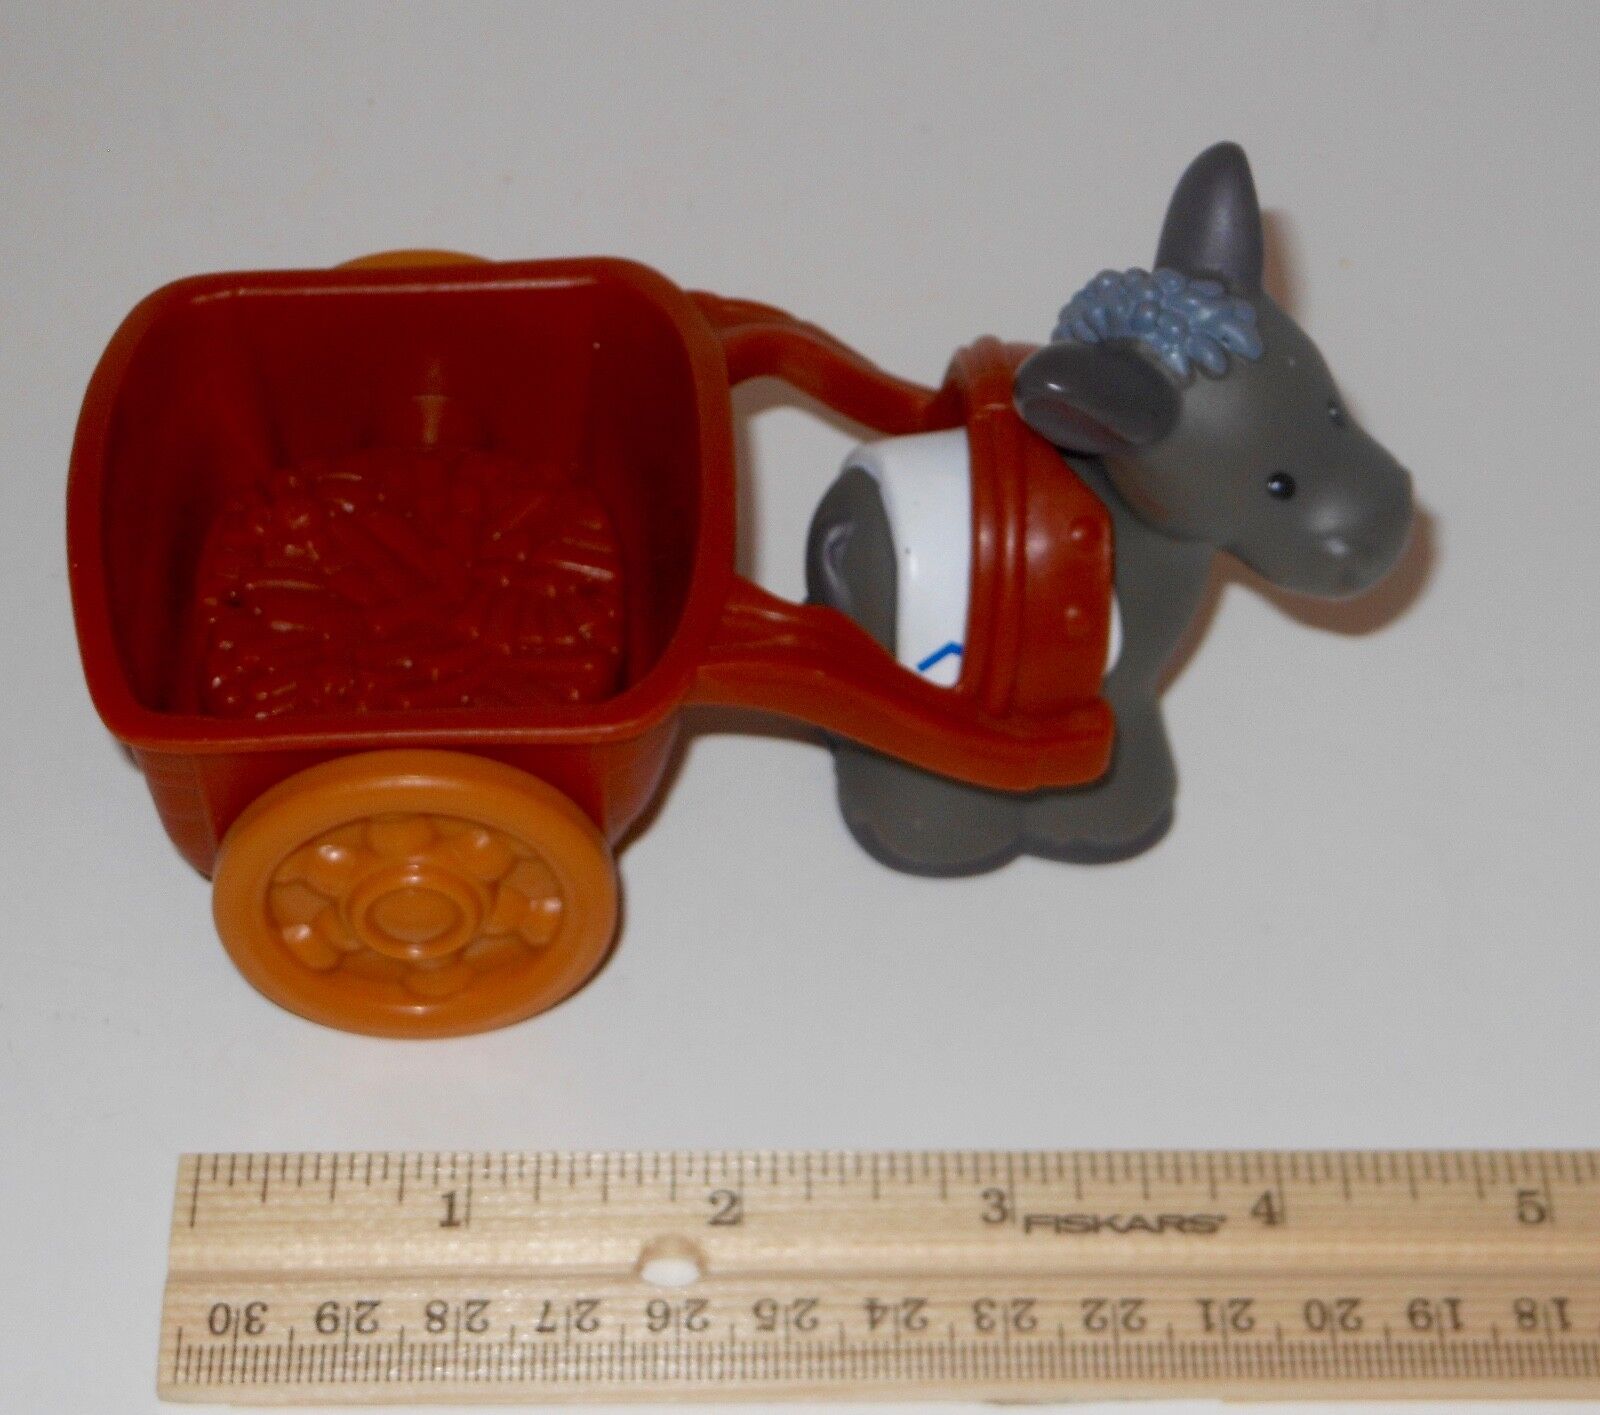 Lot 2 Donkey & Cart Replacement Parts For Fisher Price Christmas Nativity Set